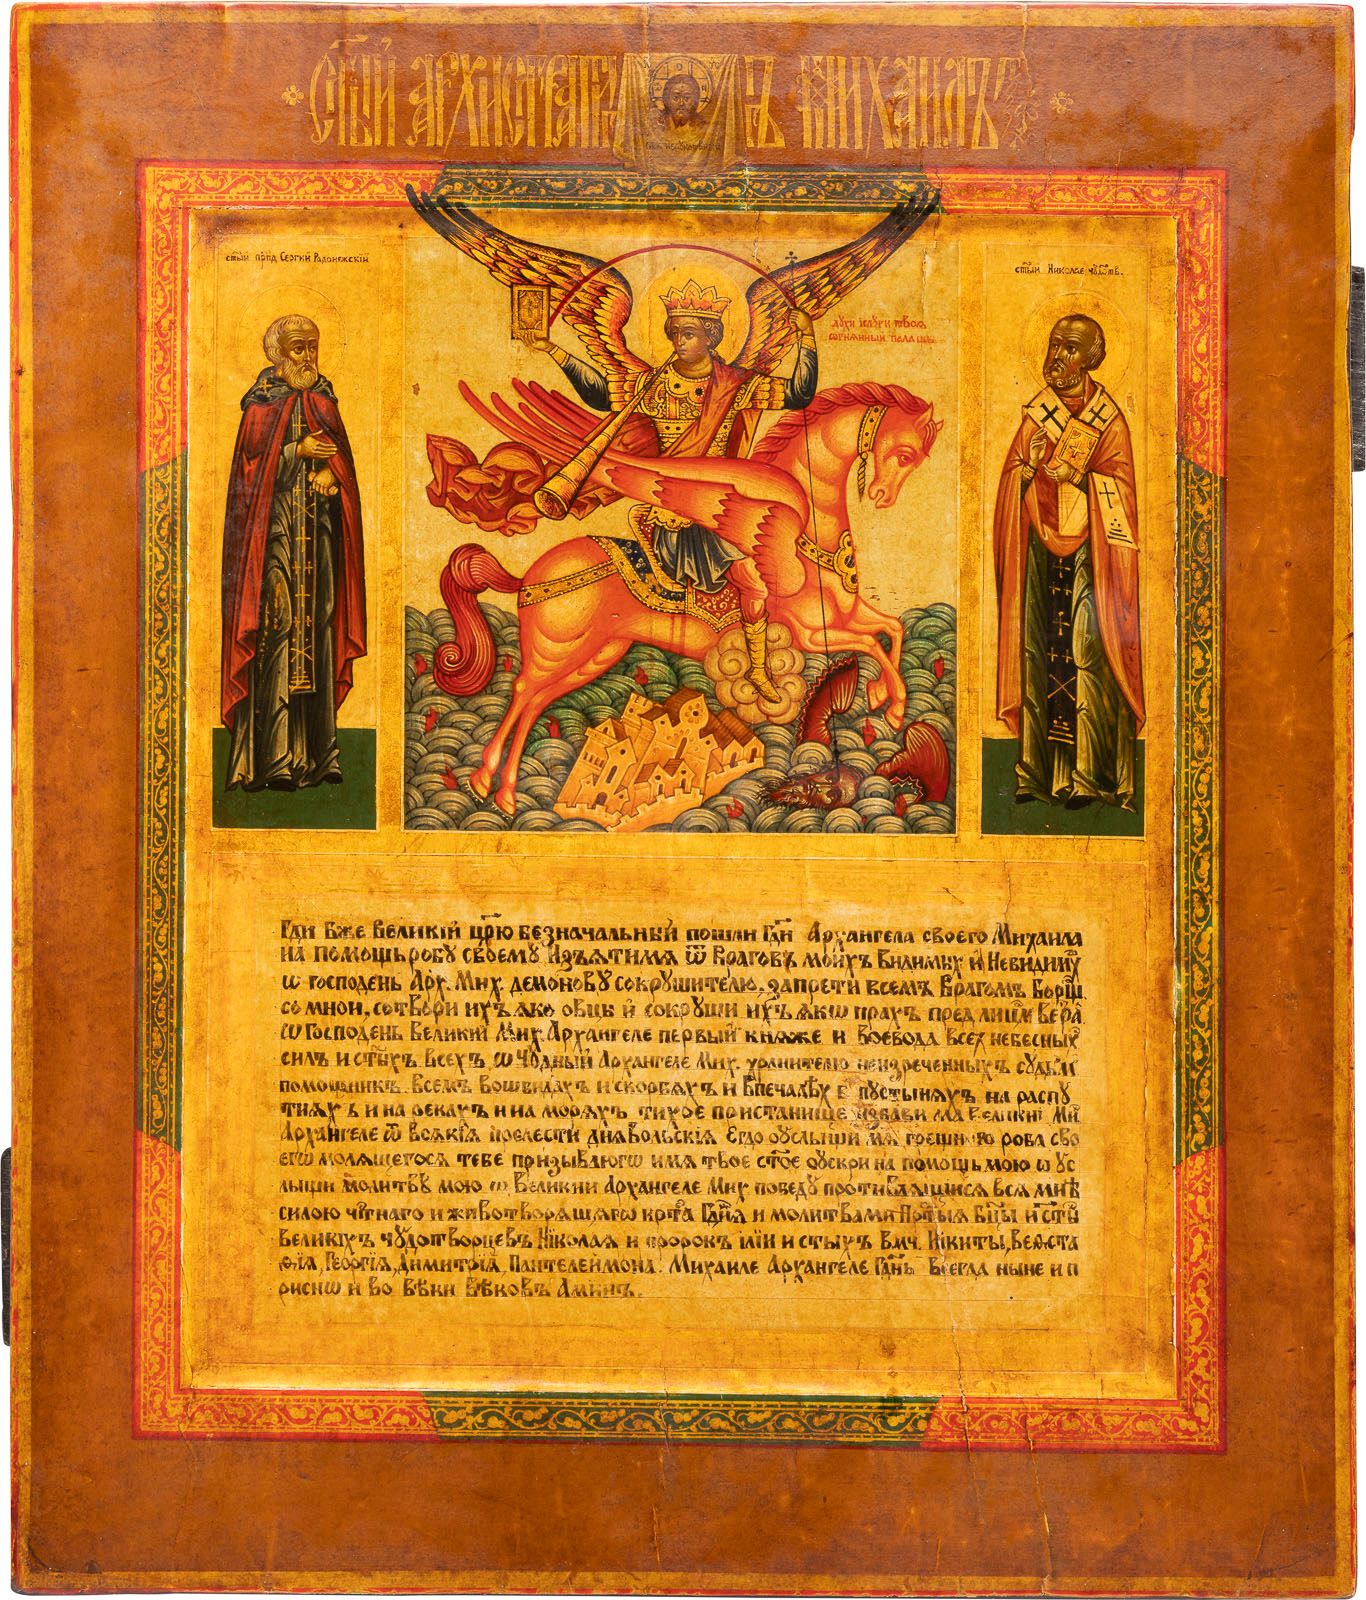 AN ICON SHOWING THE ARCHANGEL MICHAEL FLANKED BY ST. SERGEY IKONE MIT DEM HEILIG&hellip;